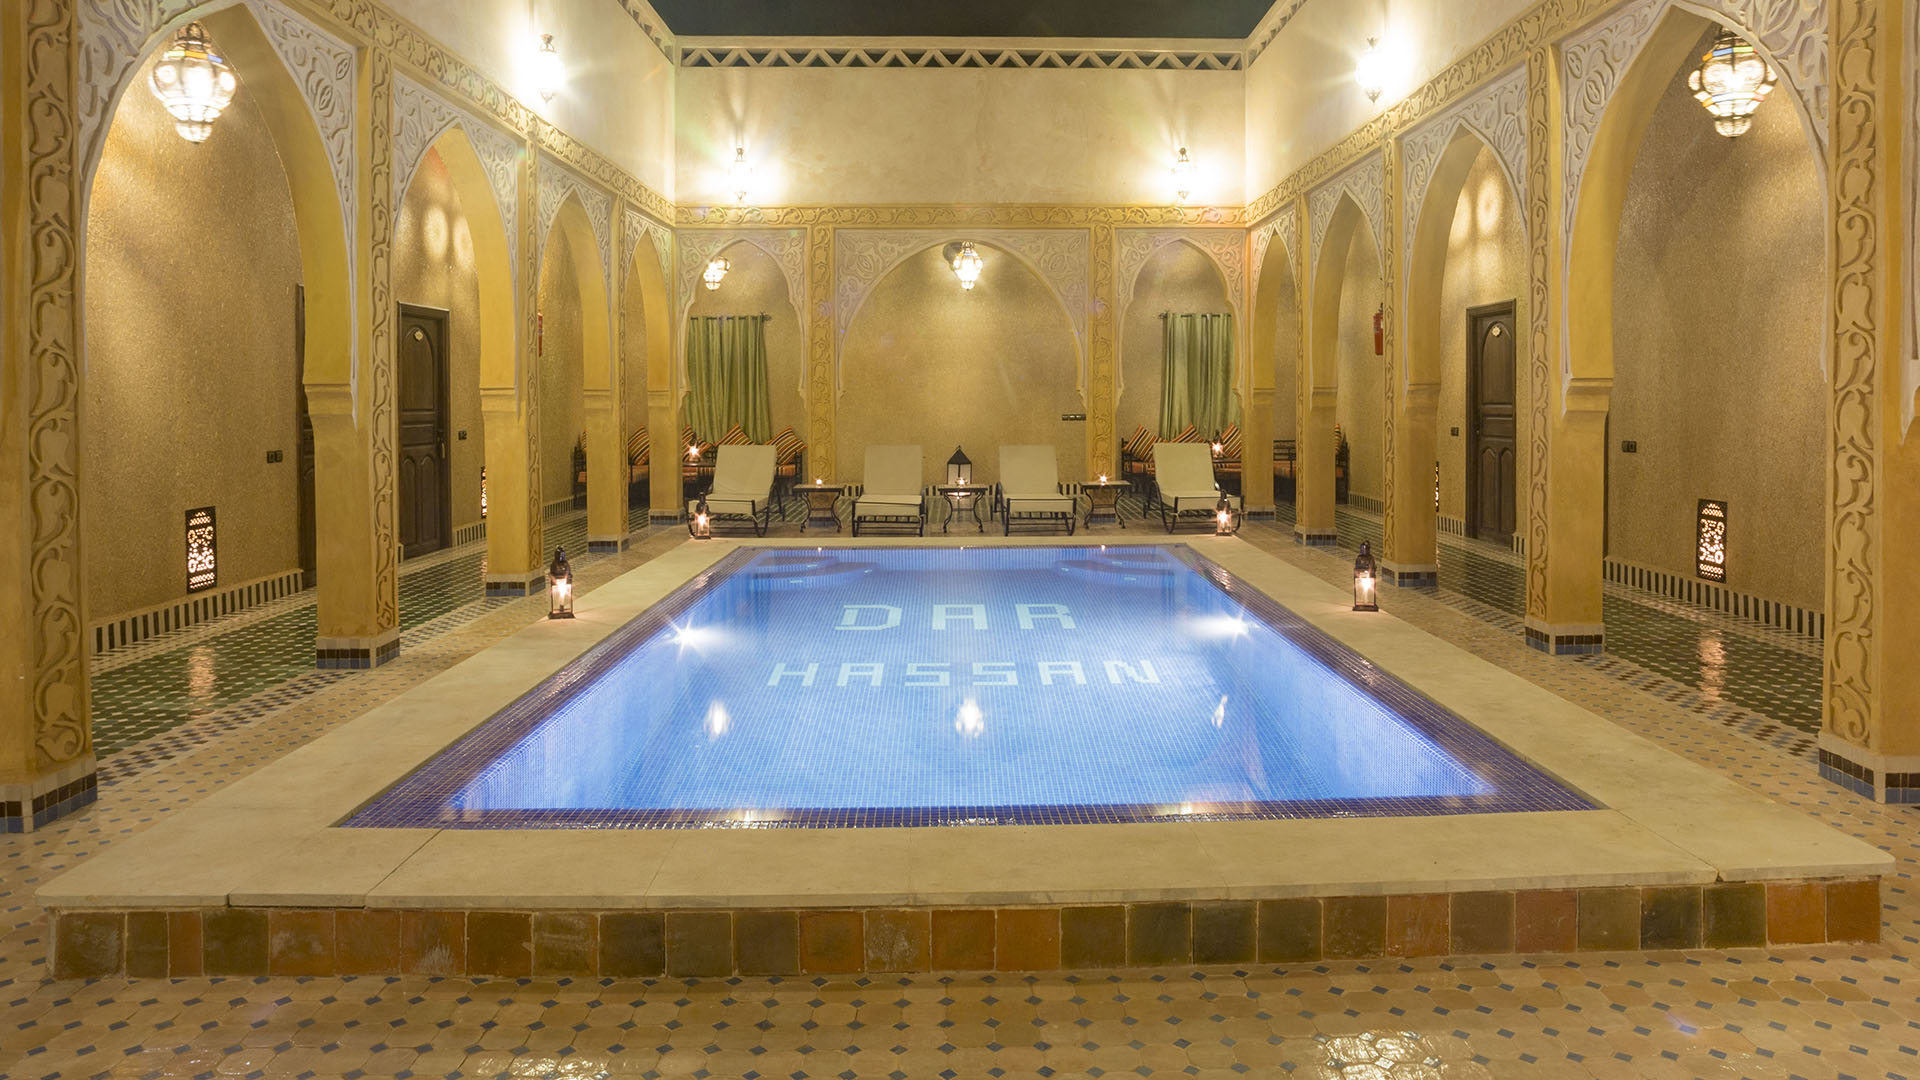 About Riad Dar Hassan swimming pool - photo Ezyê Moleda all rights reserved